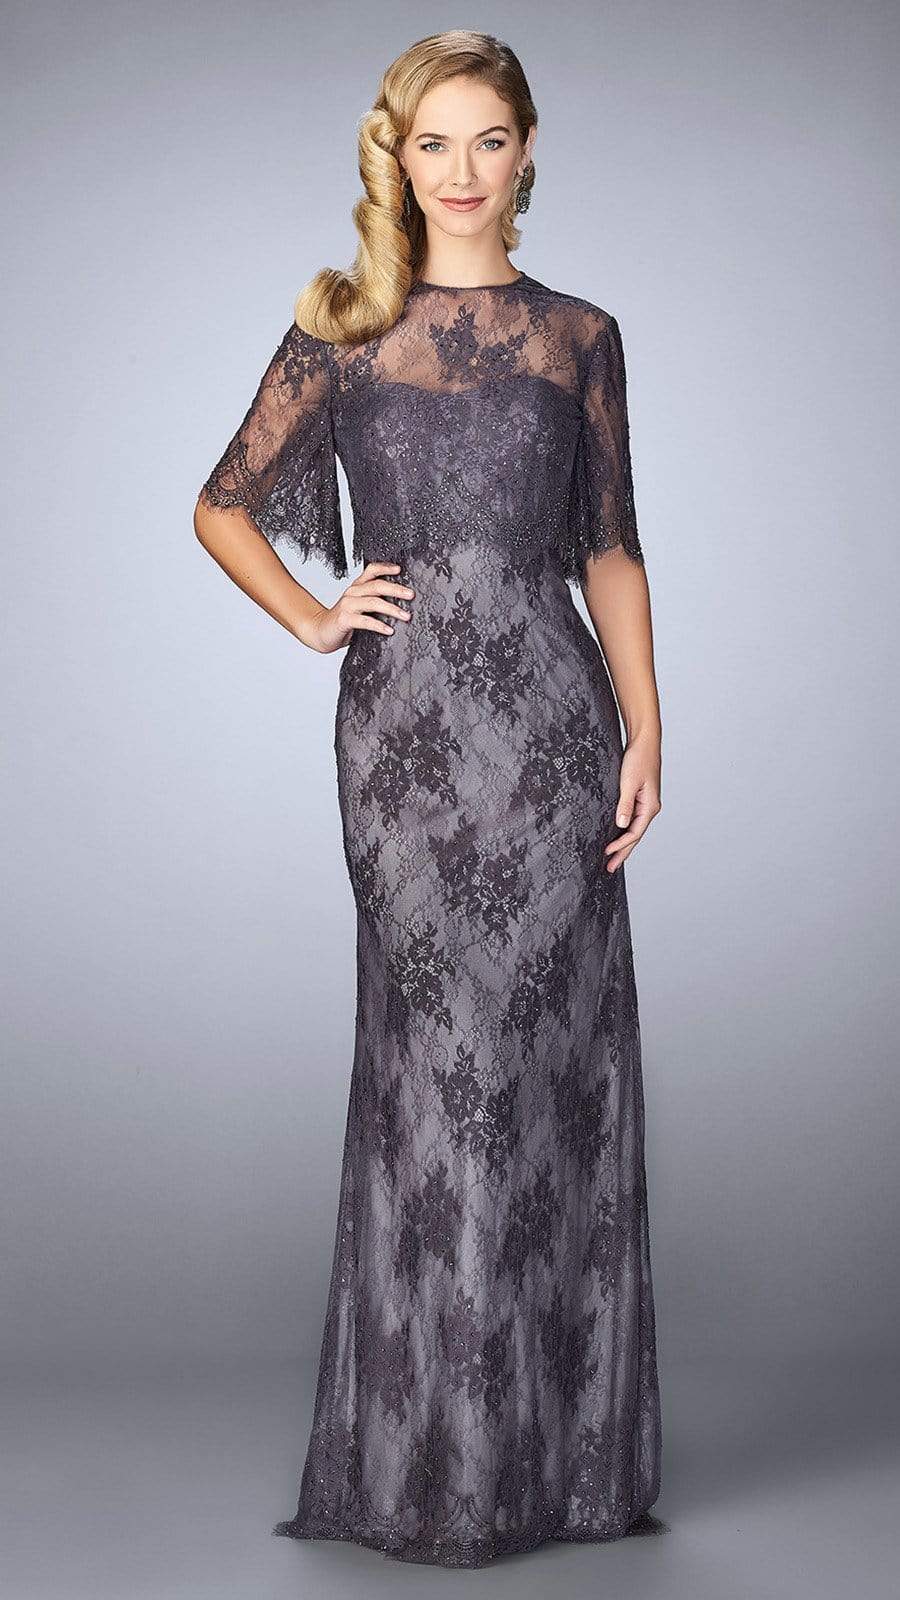 La Femme Beaded Lace Gown with Capelet 24856SC - 1 pc Charcoal in Size 10 & 1 Pc Navy in Size 16 Available CCSALE